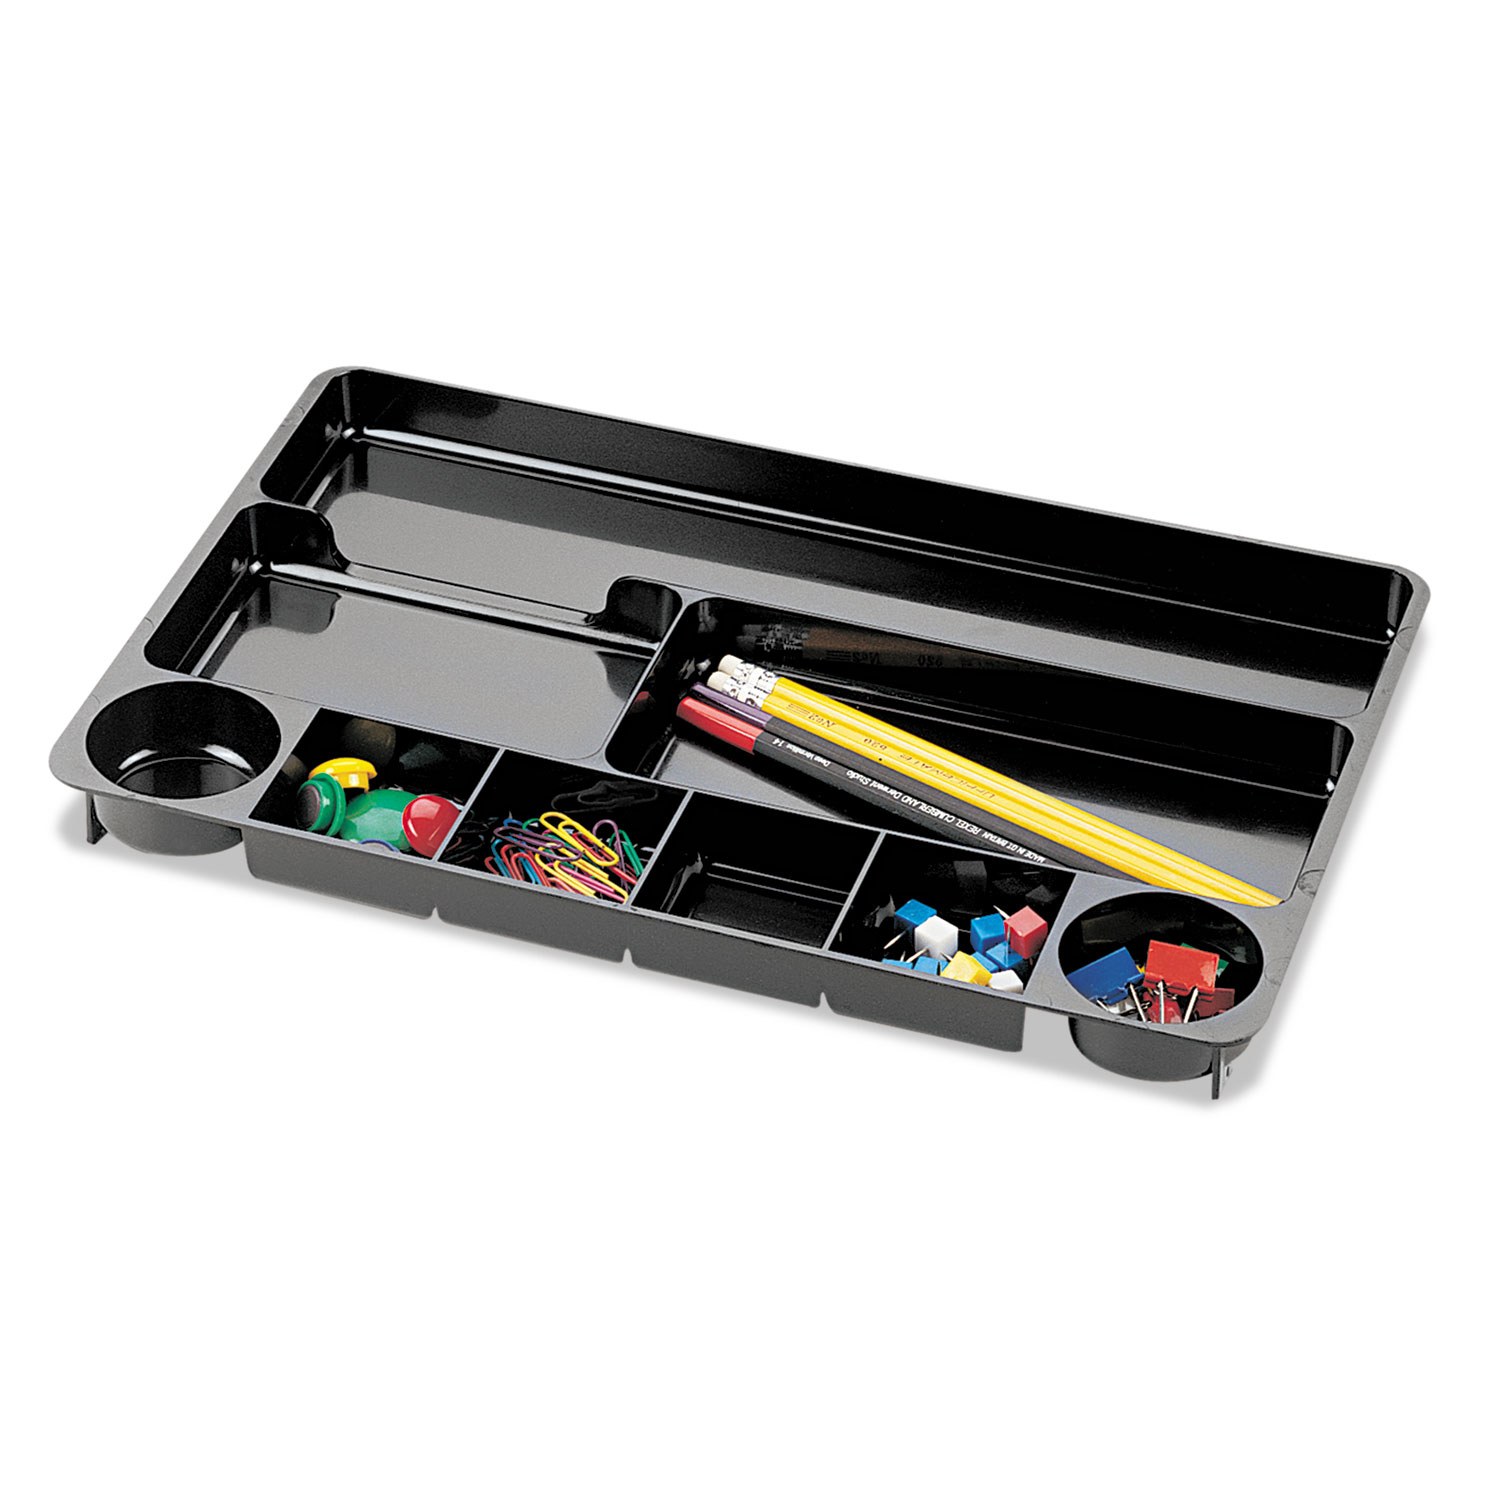  Officemate OIC26032 9 Compartment Recycled Desk Drawer Organizer, Plastic, 14 x 9 x 1 1/8, Black (OIC26032) 